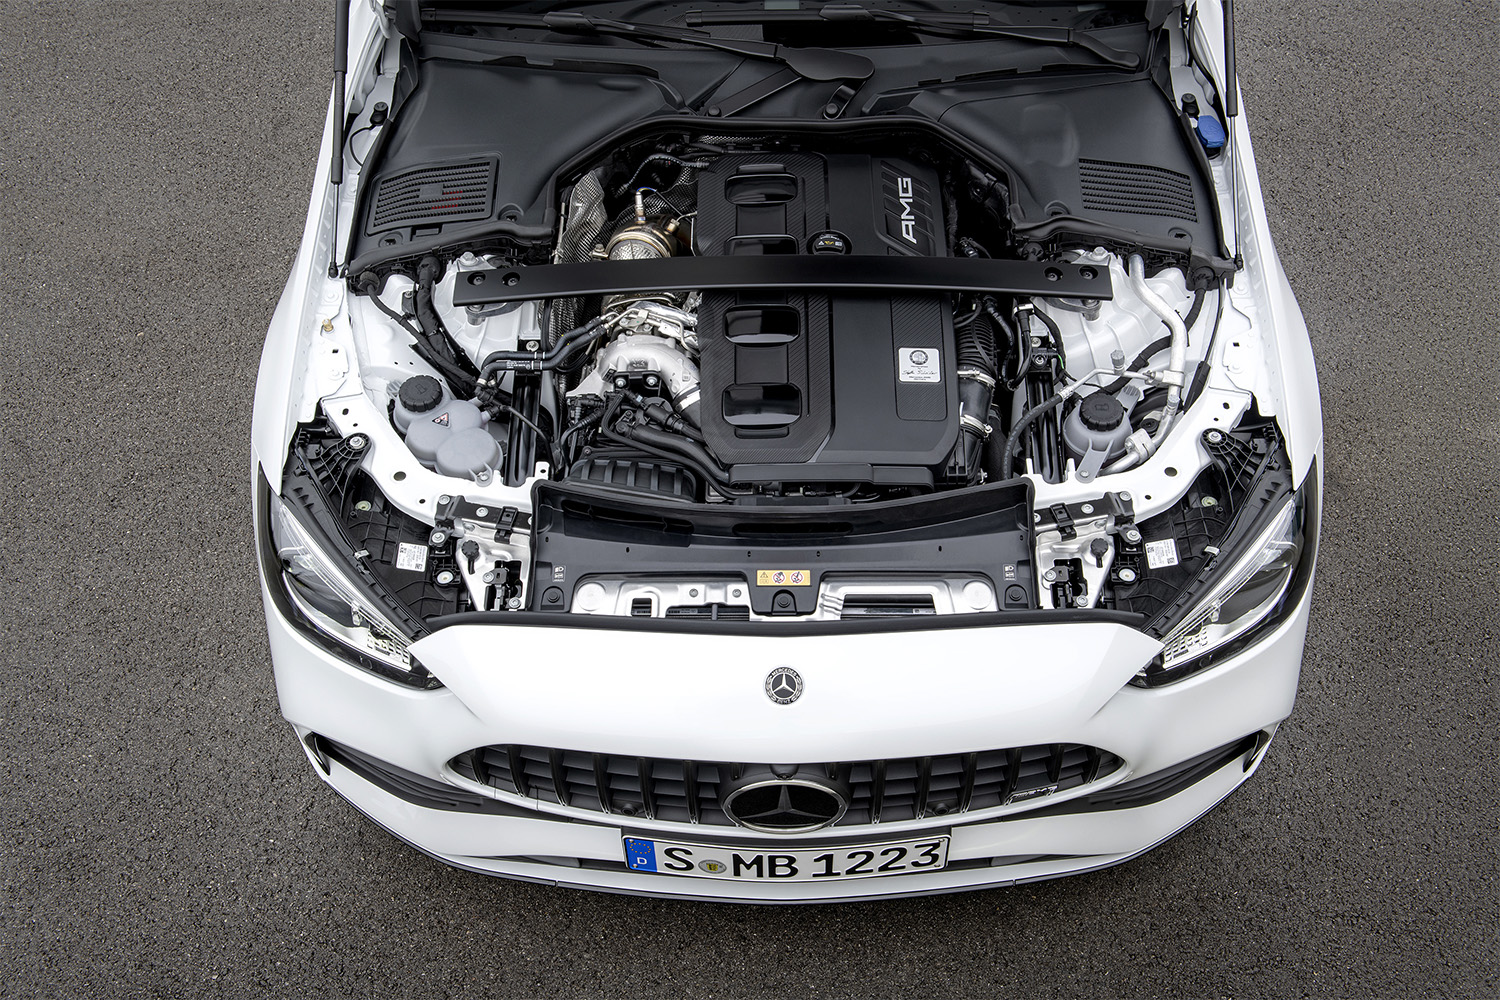 Engine view of the all-new 2023 Mercedes V43 AMG with 402 horsepower four-cylinder engine